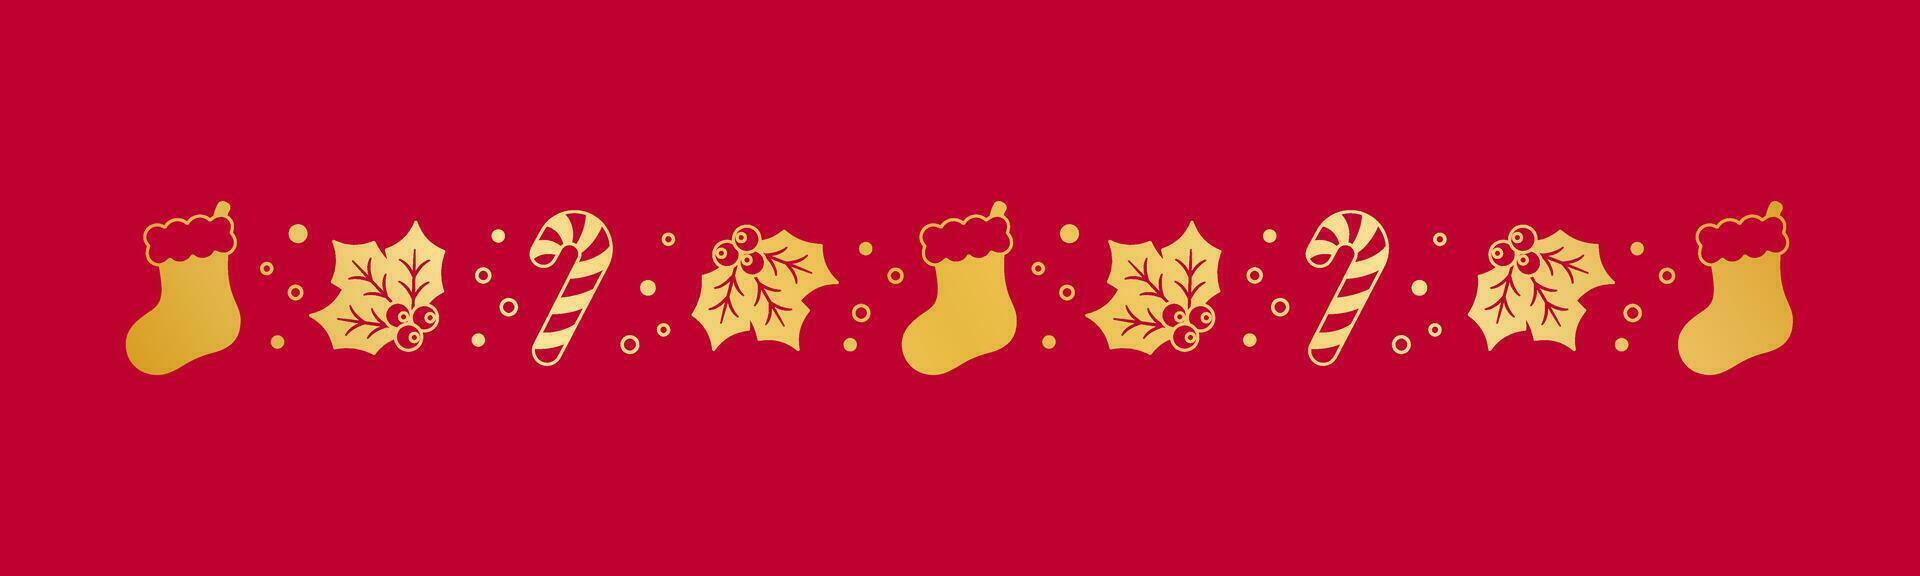 Gold Christmas themed decorative border and text divider, Christmas Stocking, Candy Cane and Mistletoe Pattern Silhouette. Vector Illustration.